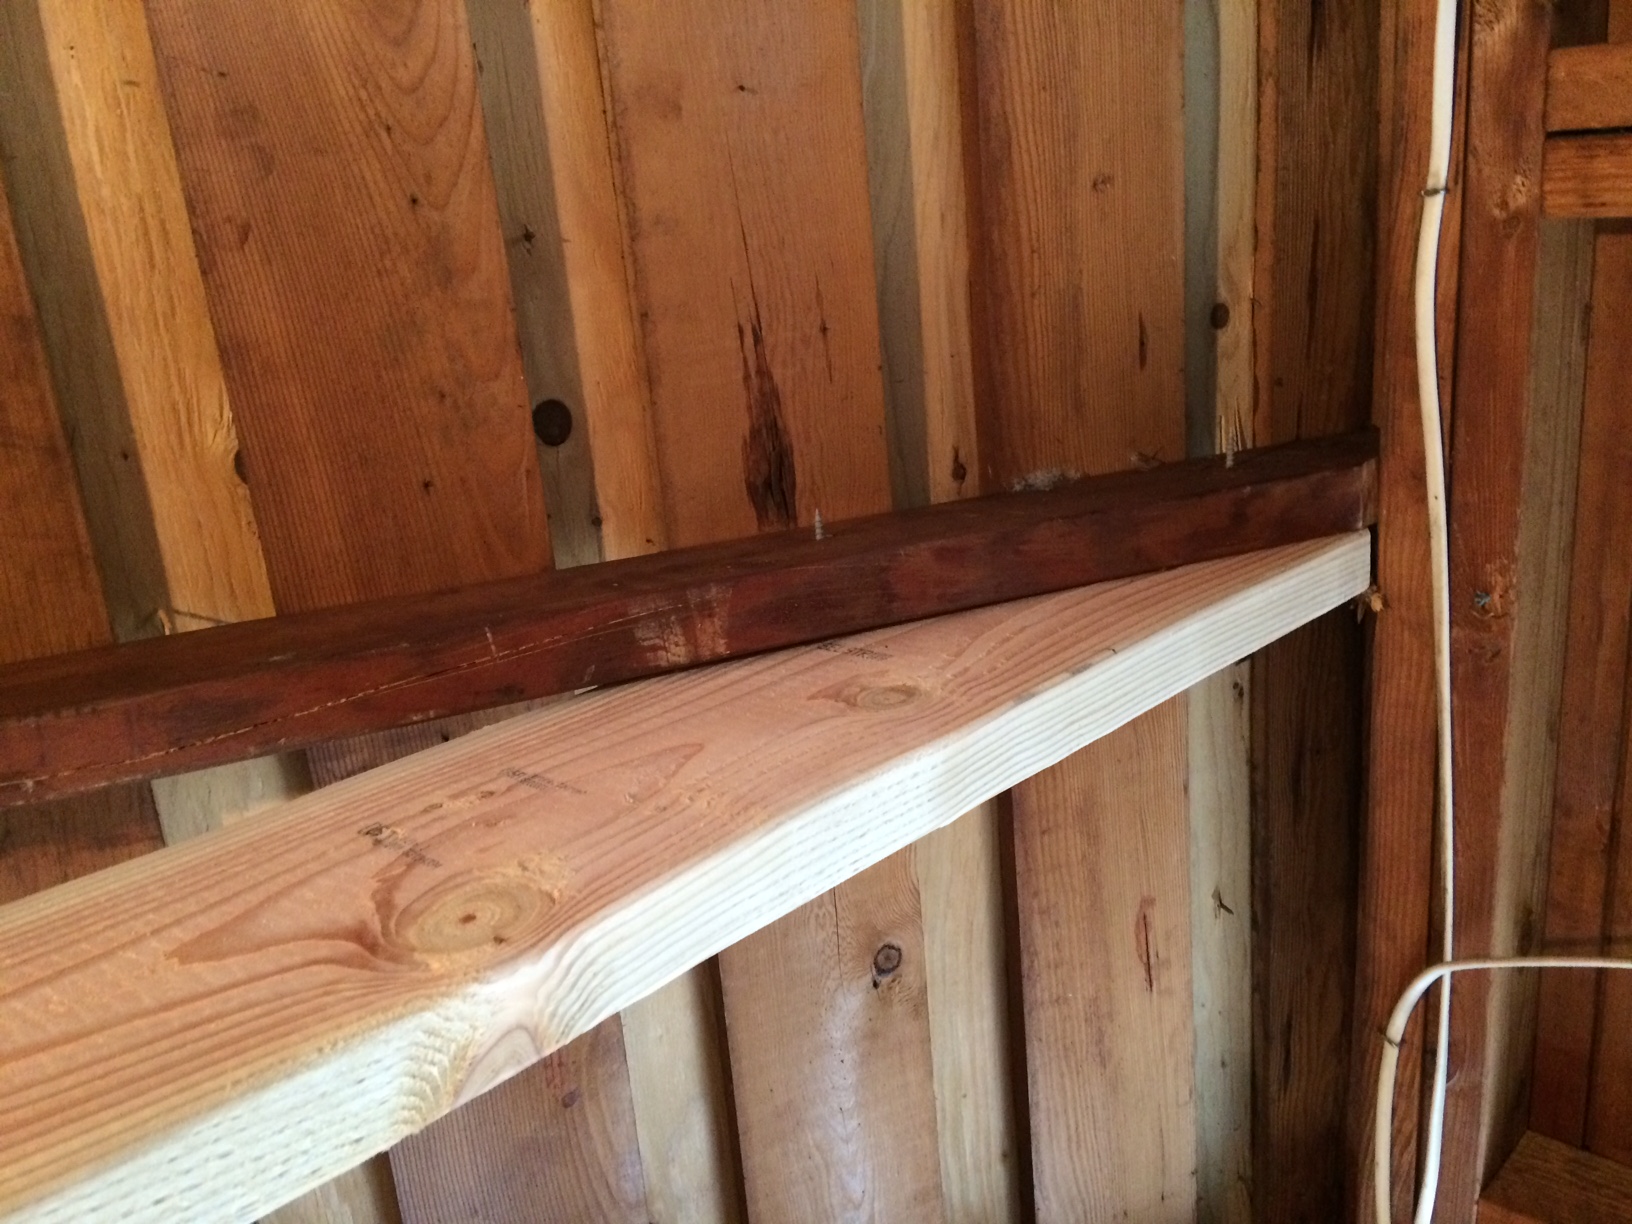 Ceiling joist ends do not sit on stud walls